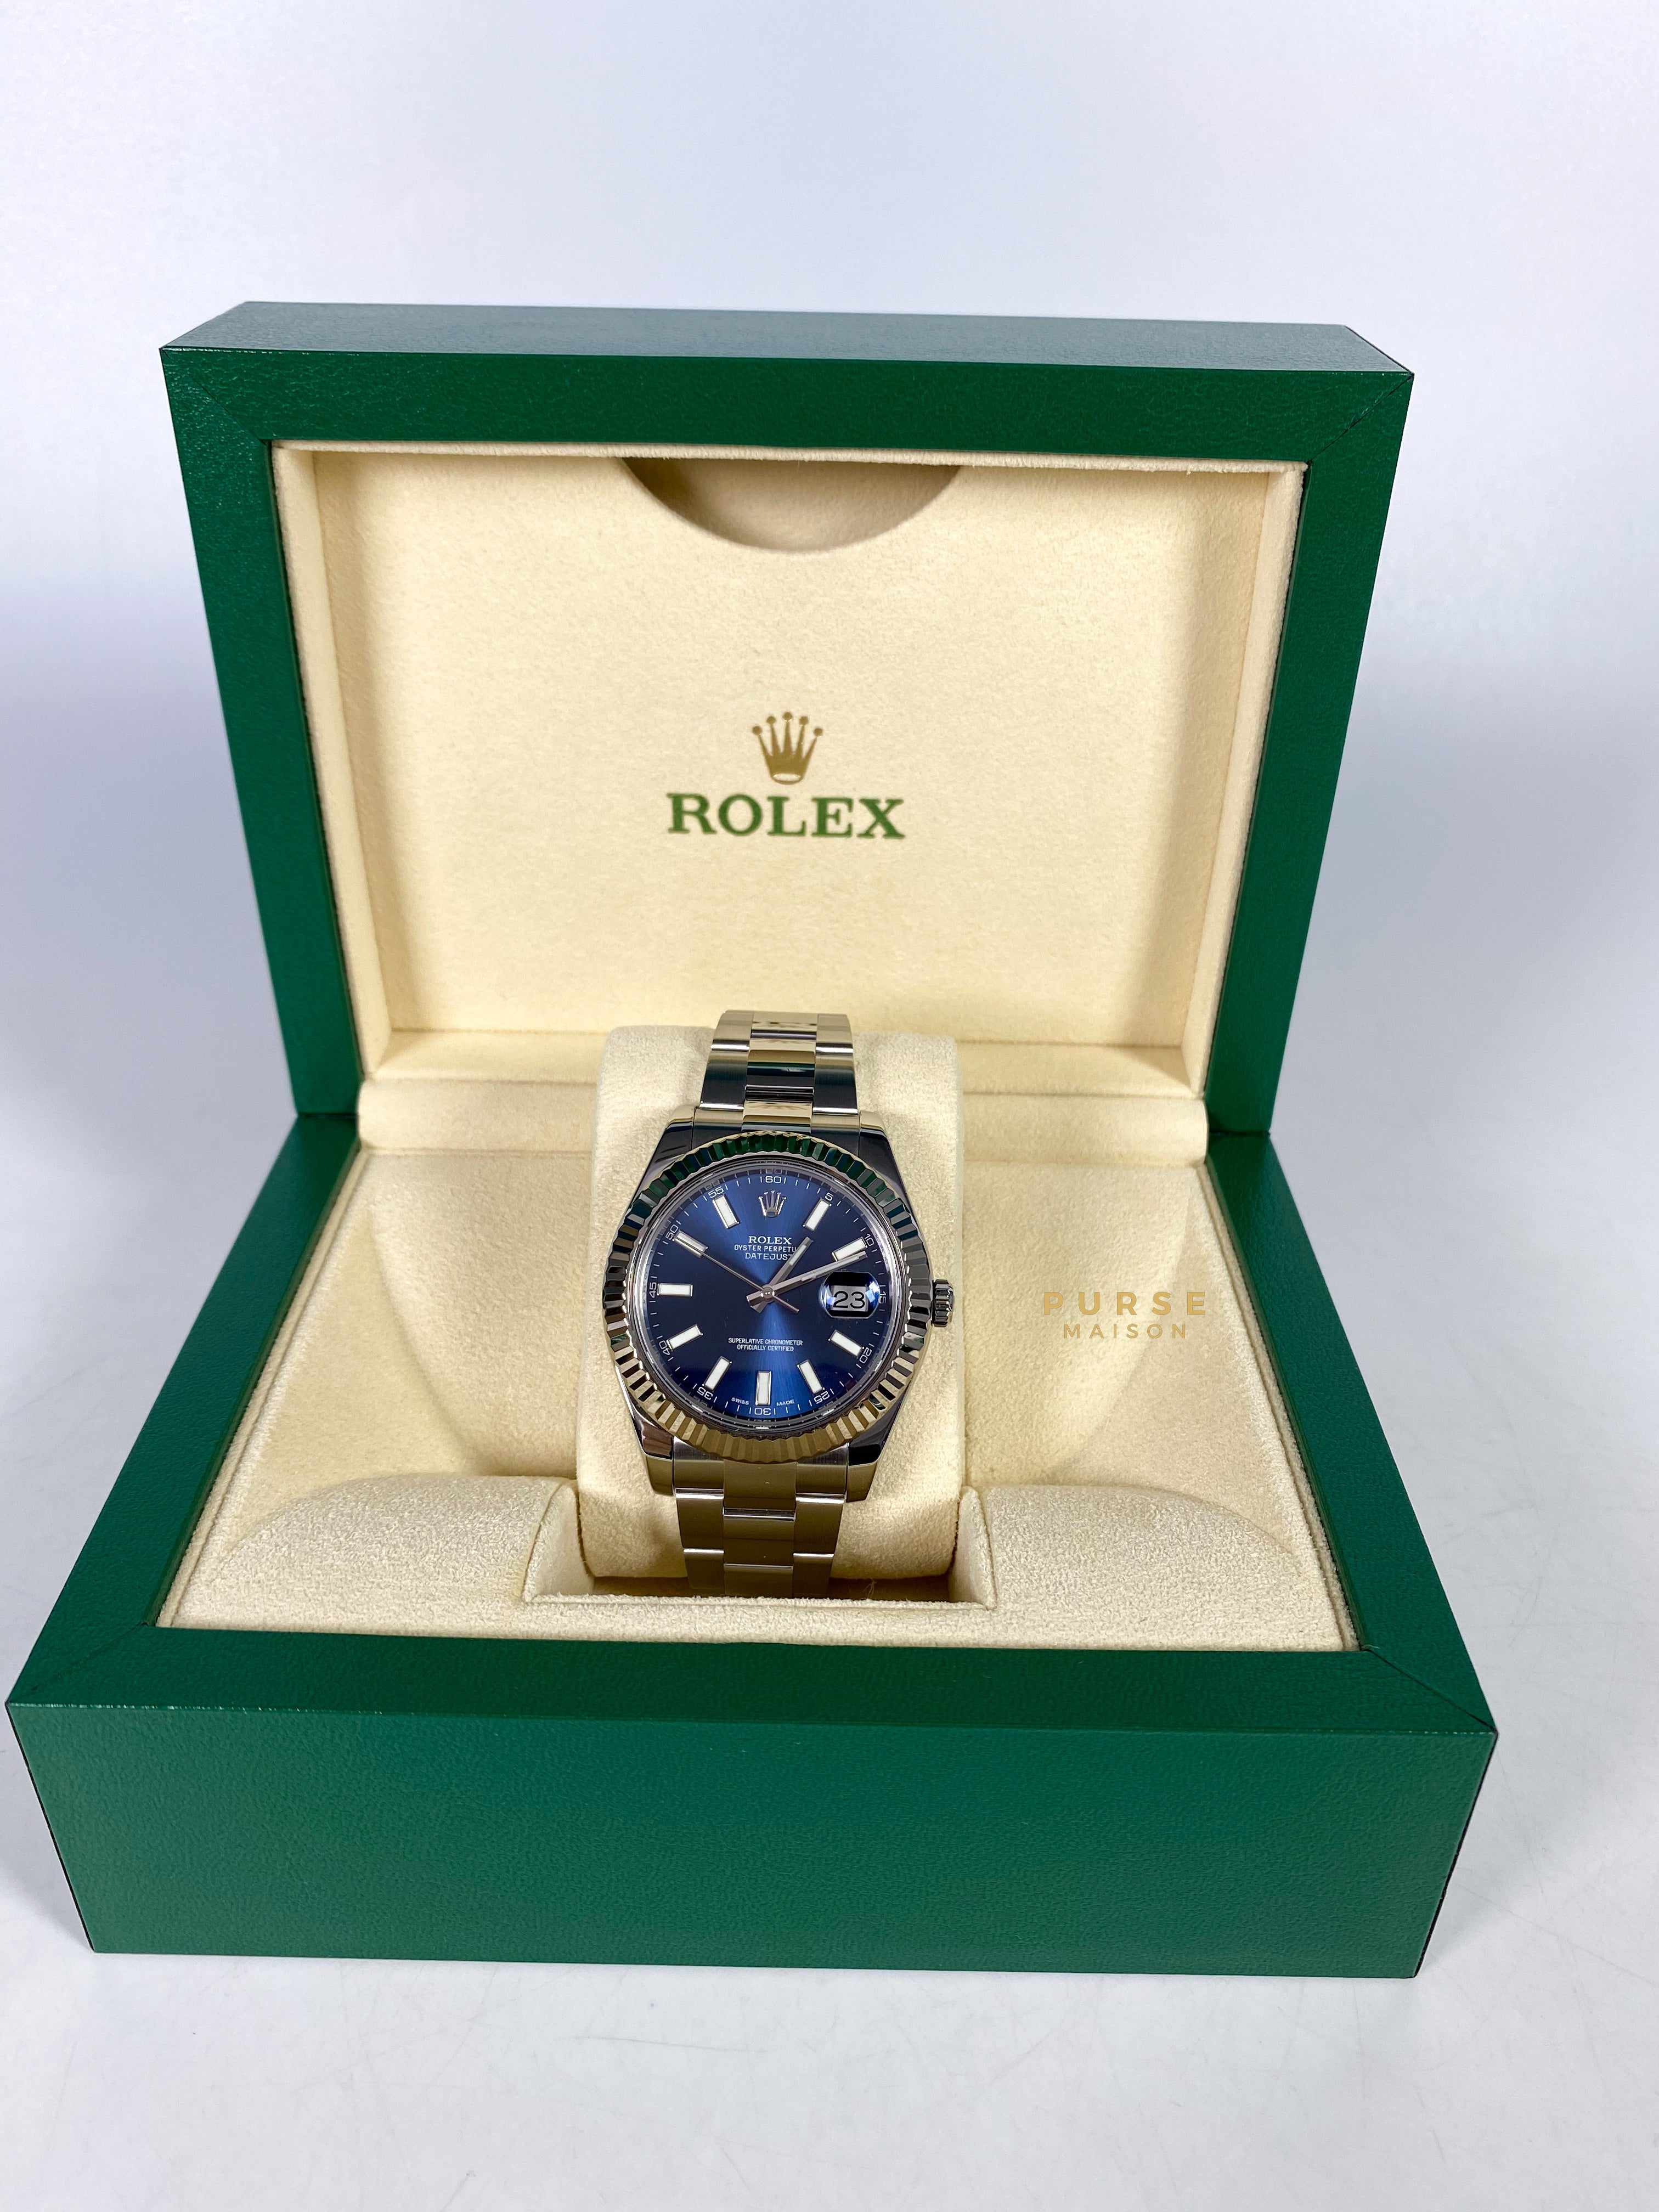 Rolex 11634 Datejust Oyster Perpetual Blue Dial 41mm Watch (2015)